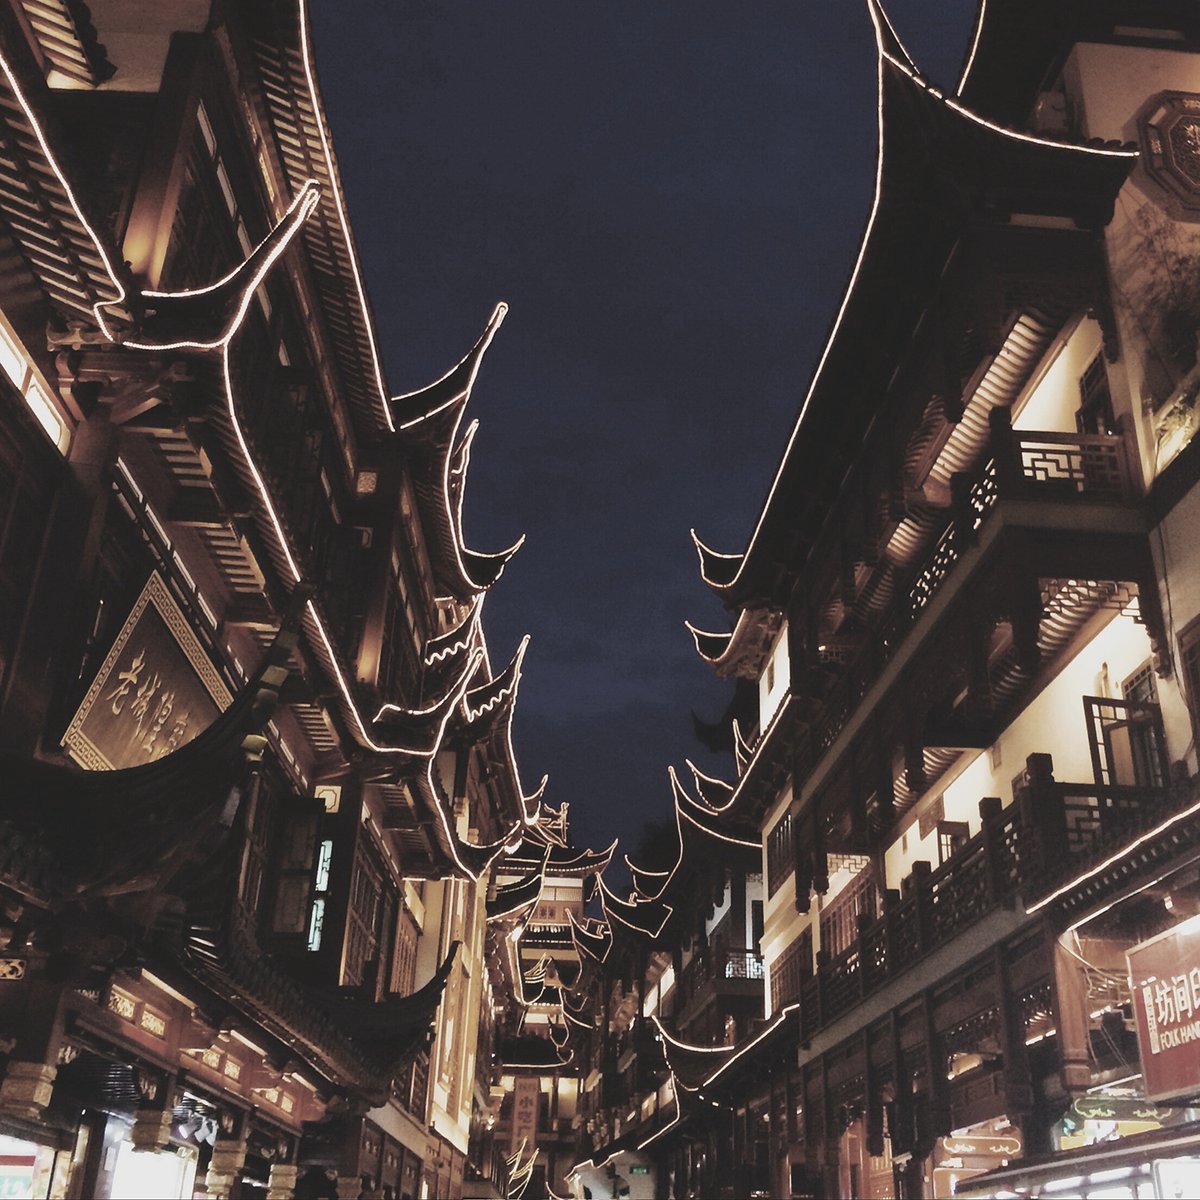 'There's something about arriving in new cities, wandering empty streets with no destination. I will never lose the love for the arriving, but I'm born to leave' - Charlotte Eriksson 

#cityquotes #shanghainight